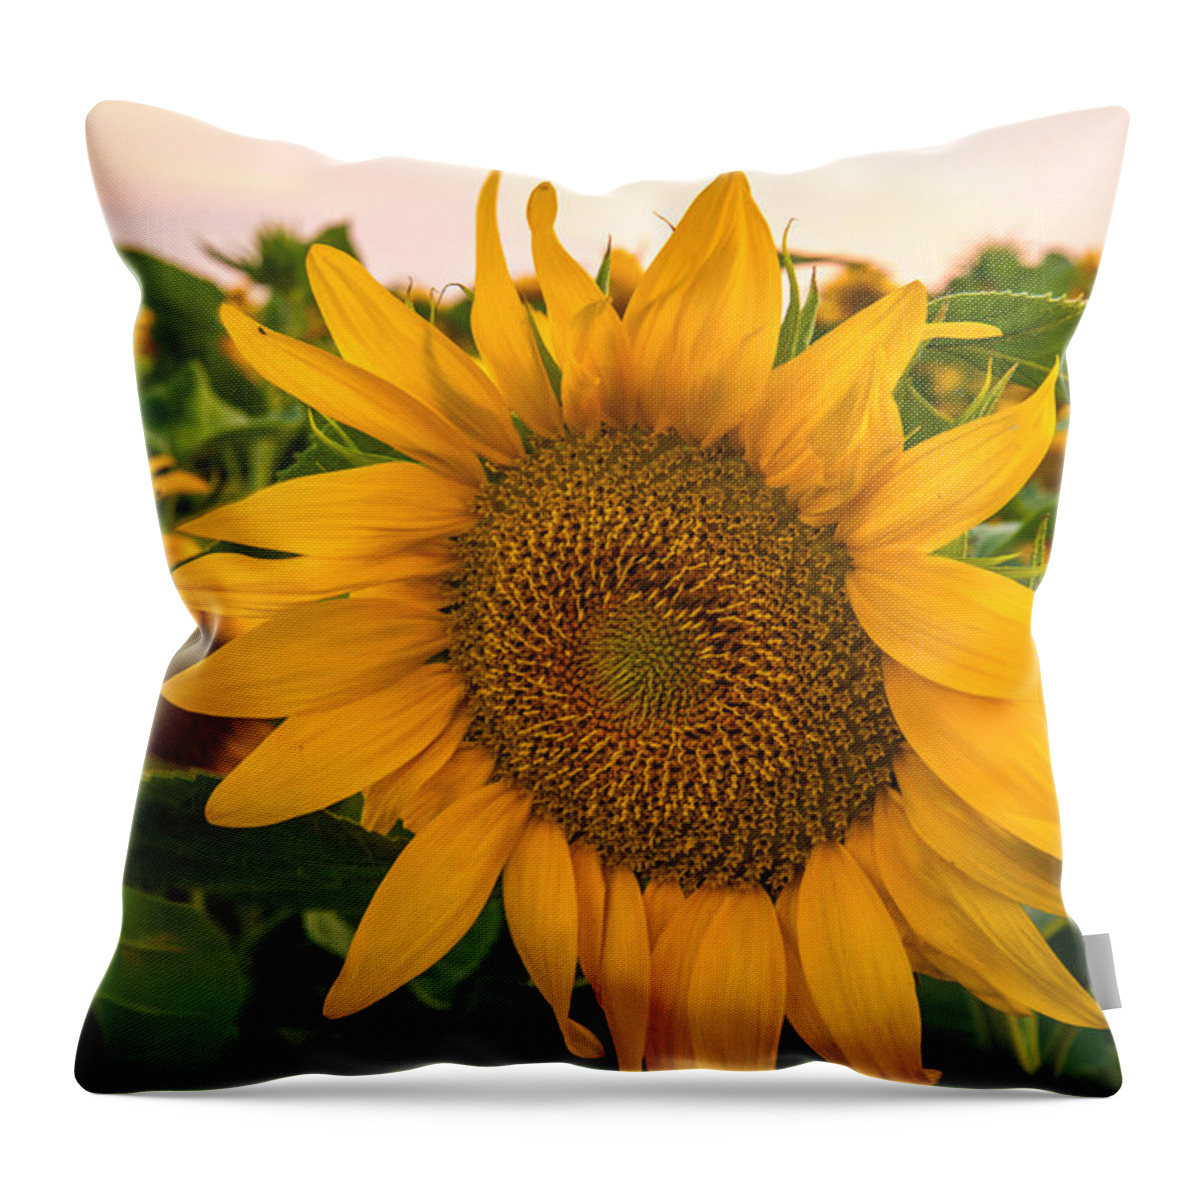 Sunflowers Throw Pillow featuring the photograph Sunflowers by Janet Kopper